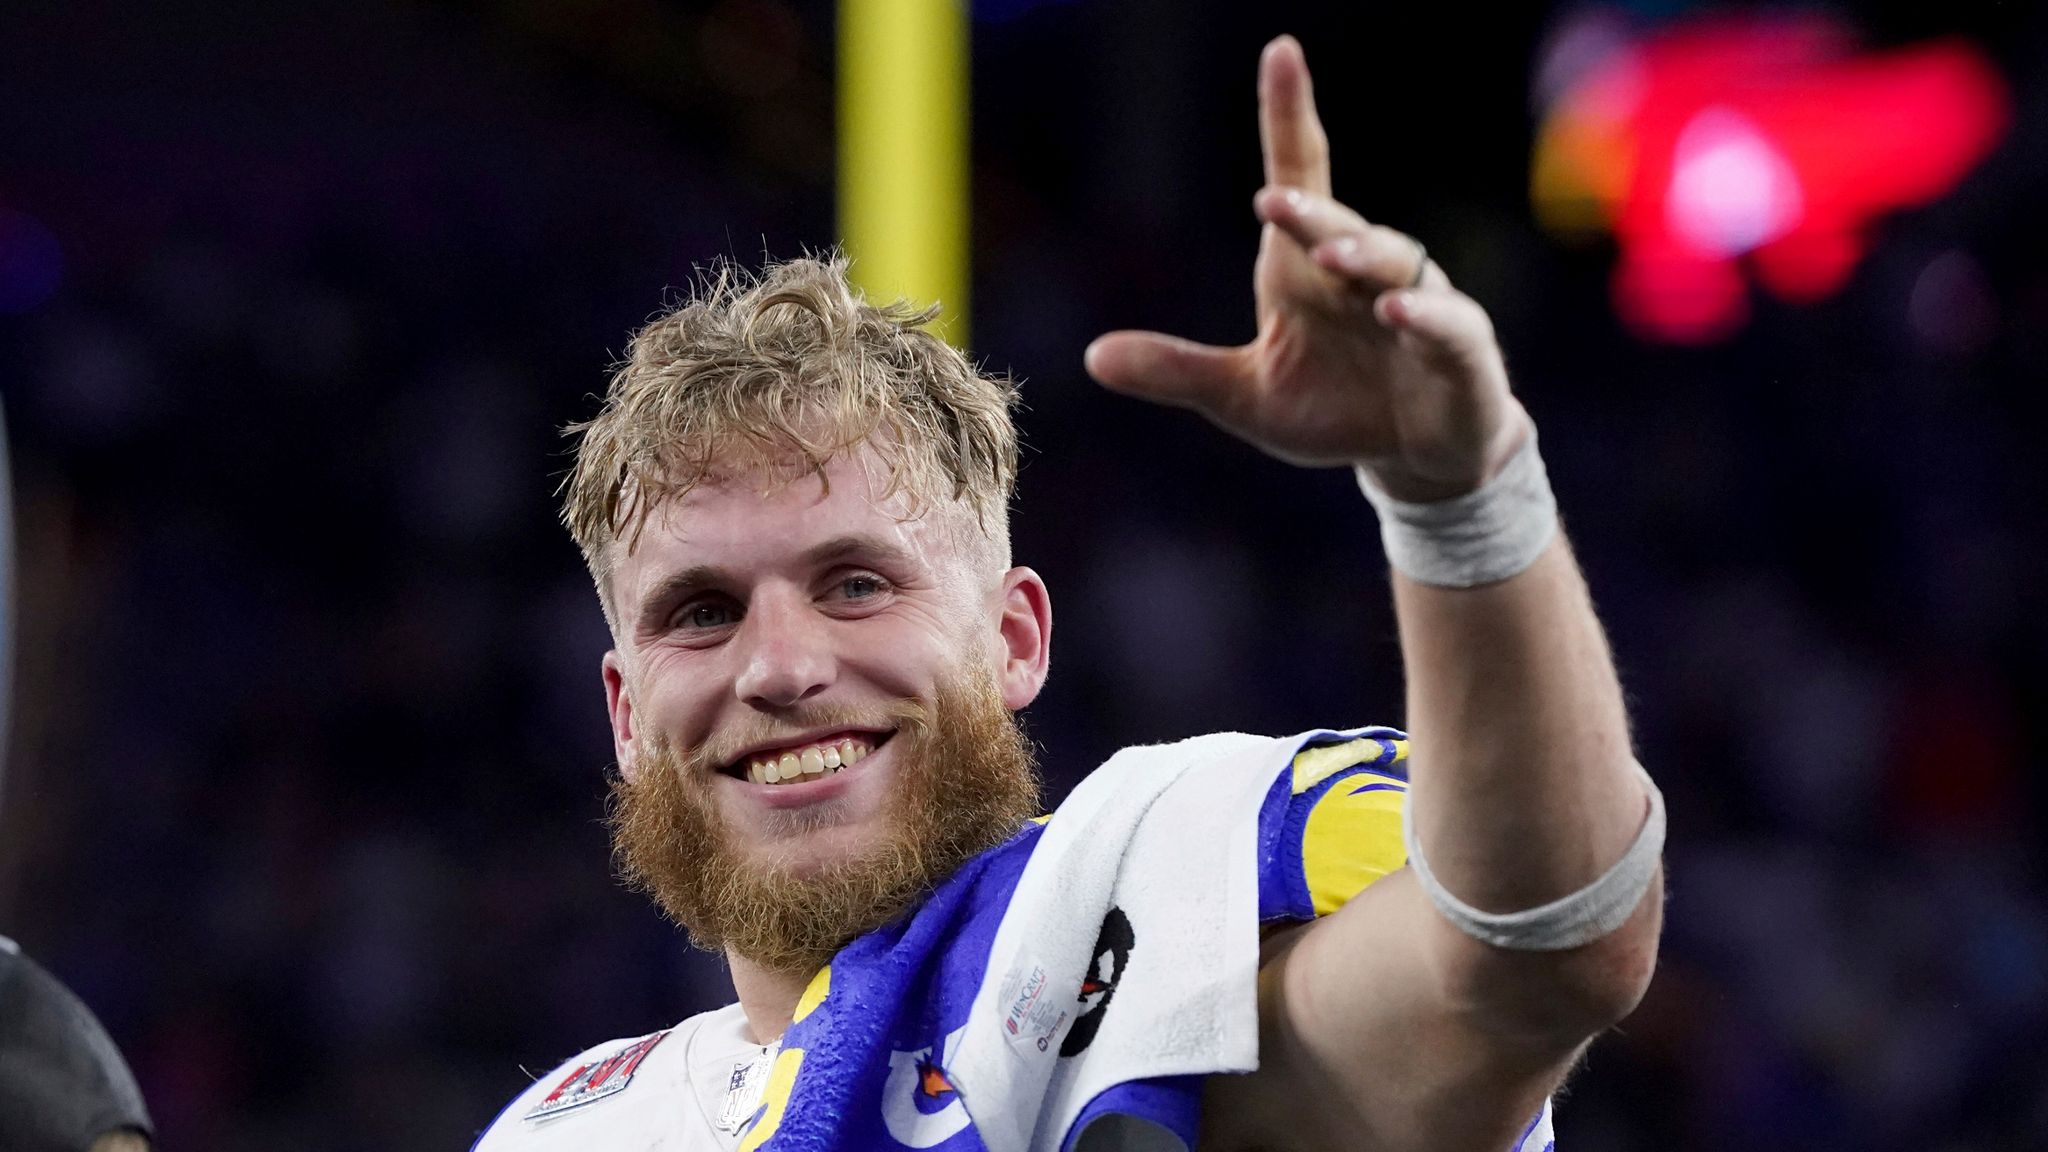 Cooper Kupp: Los Angeles Rams star reveals he had vision of